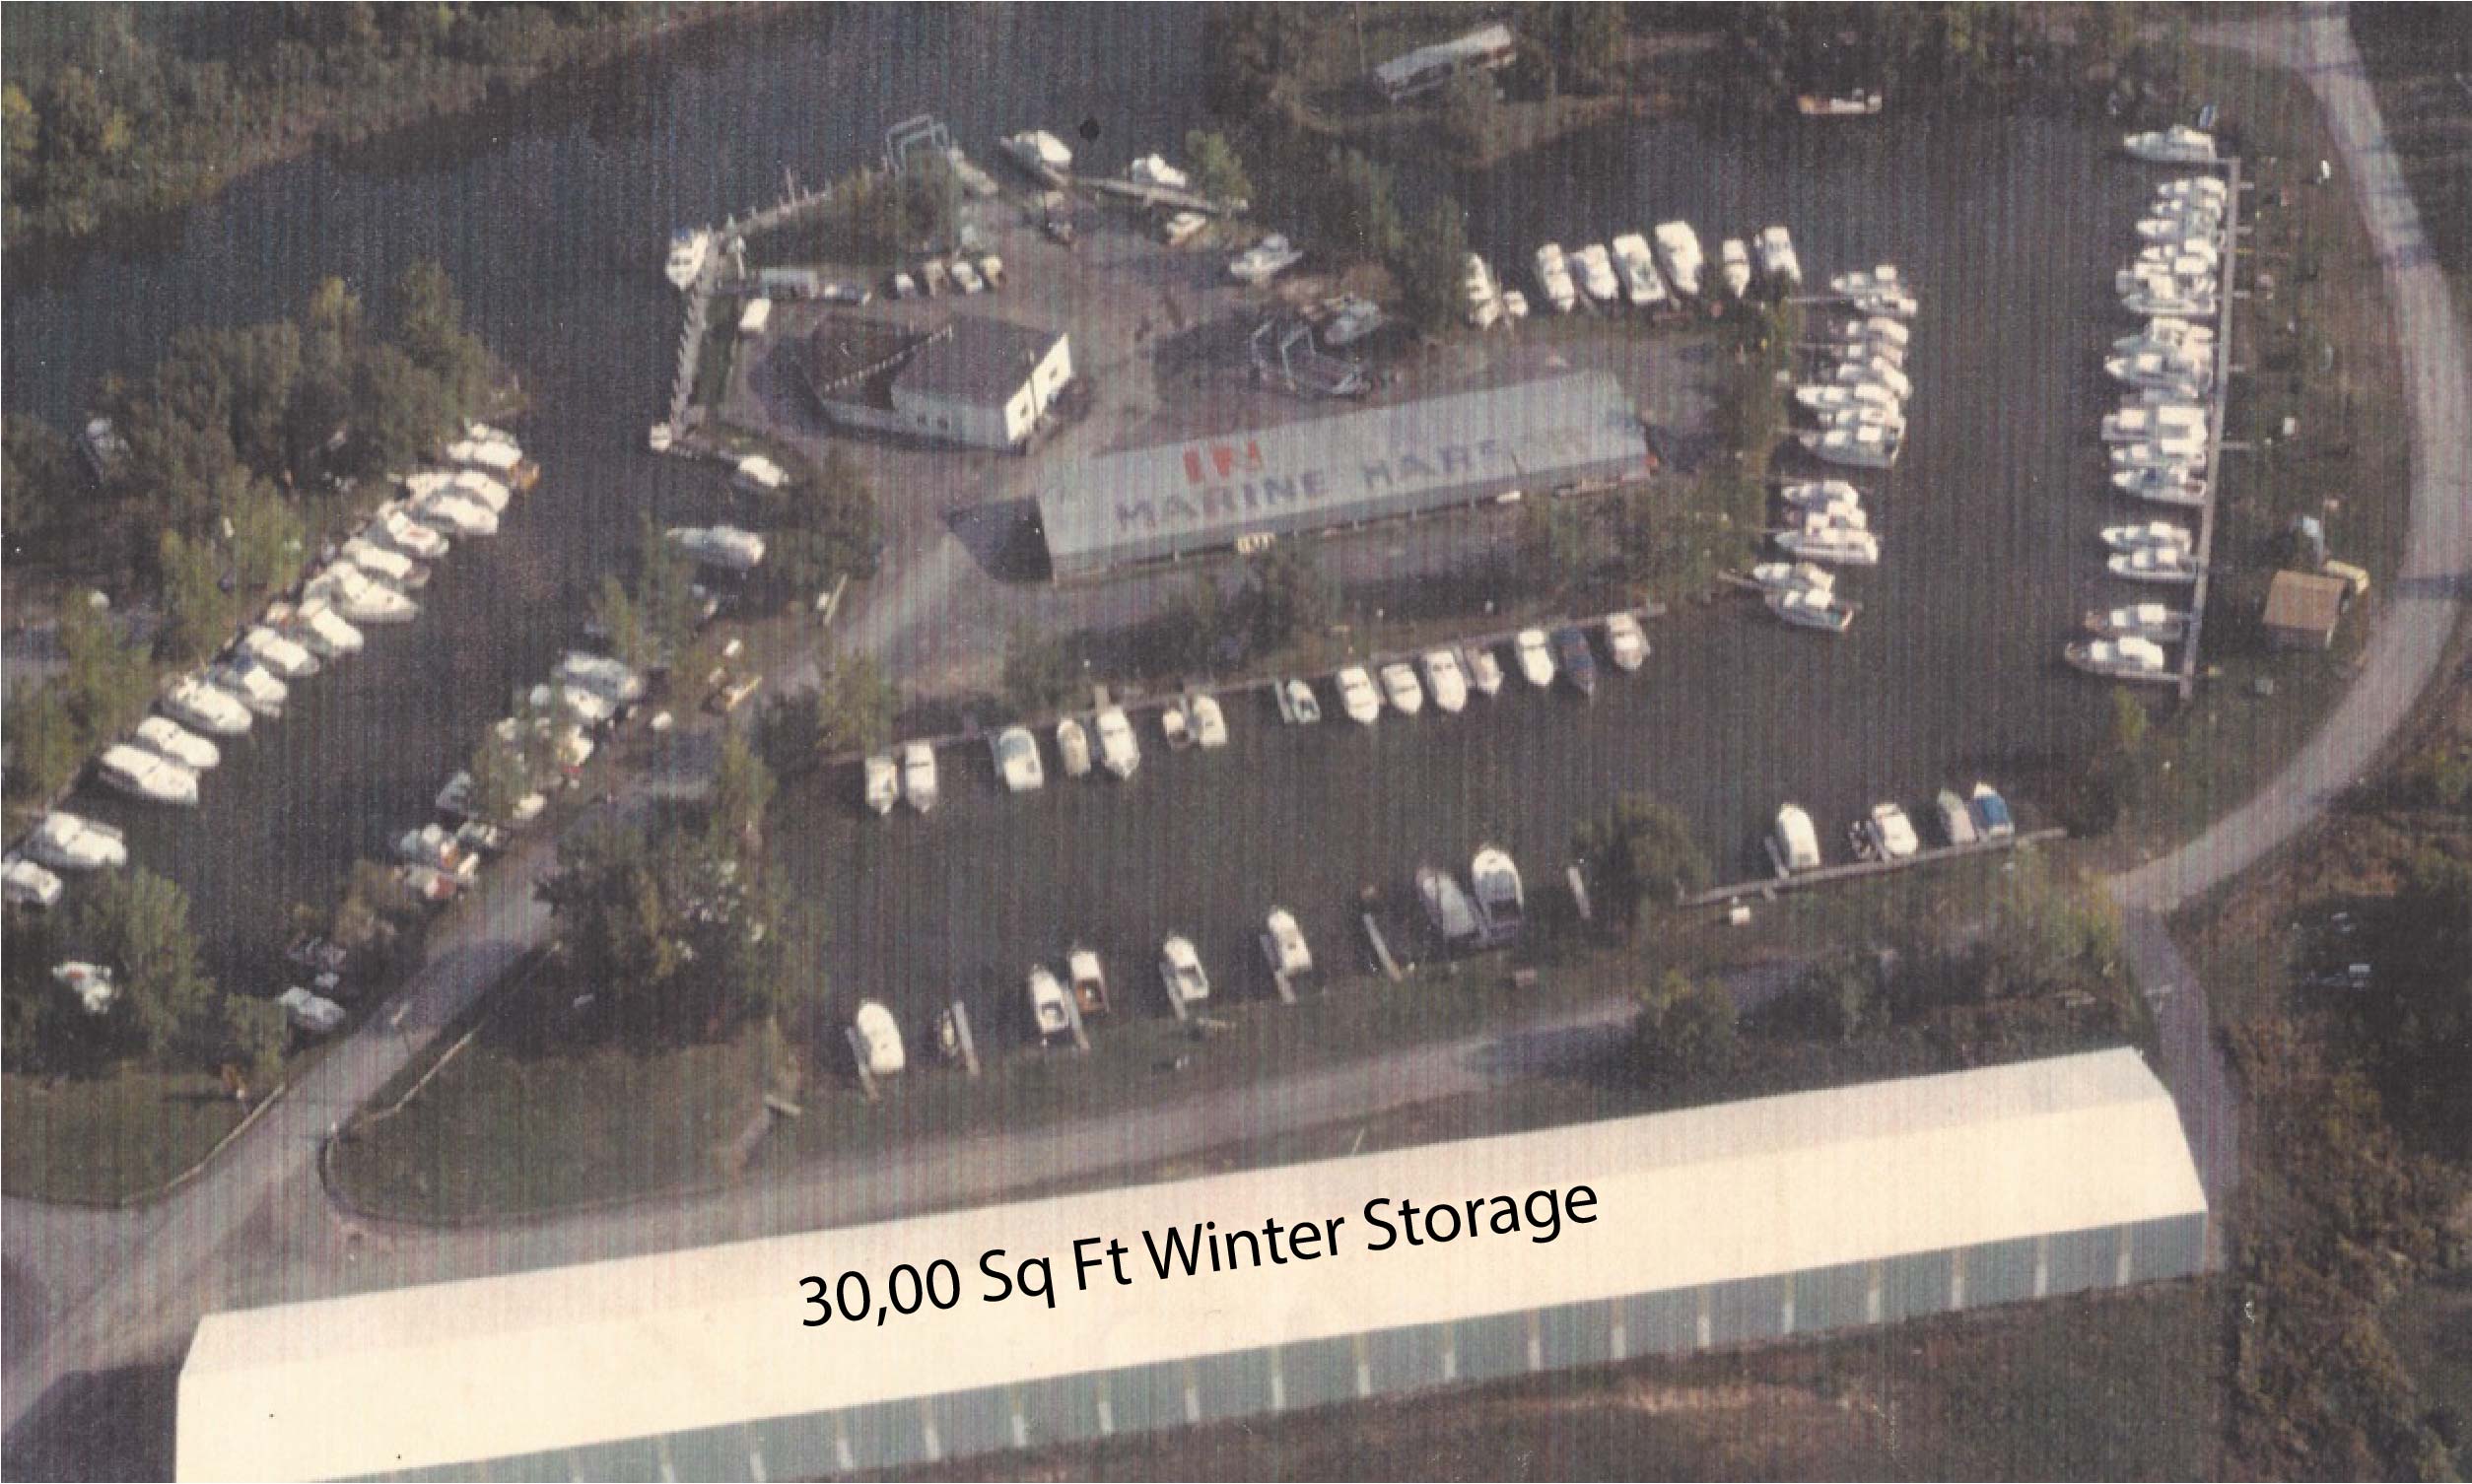 Inland Harbor Marina has a 30,000 square foot indoor storage facility for your winter storage needs.